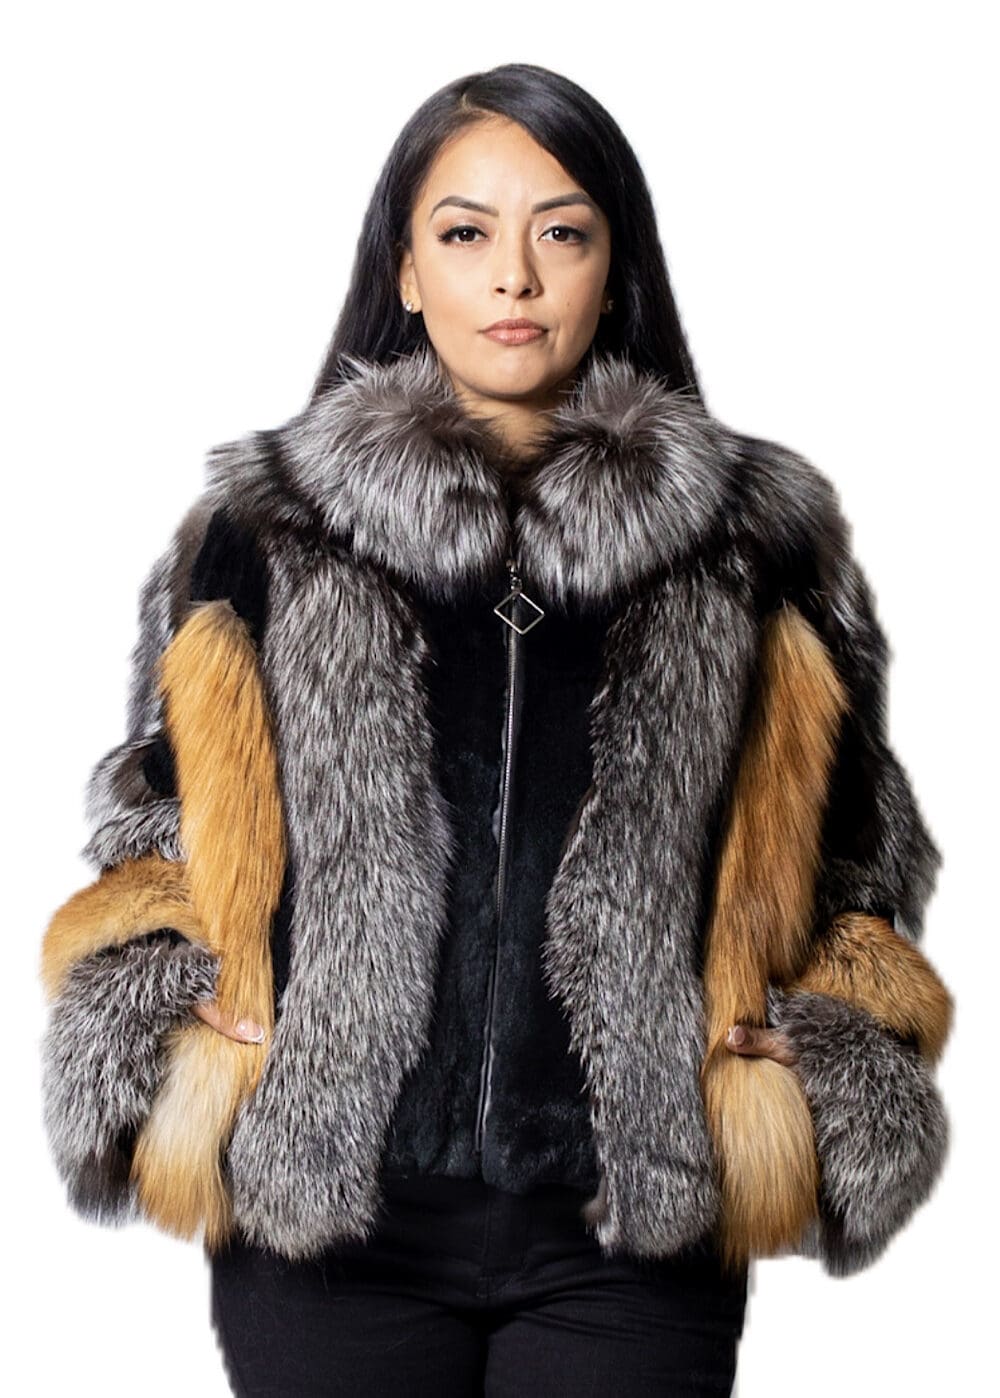 33 2 Red and Silver Fox Fur Jacket Ugent Furs